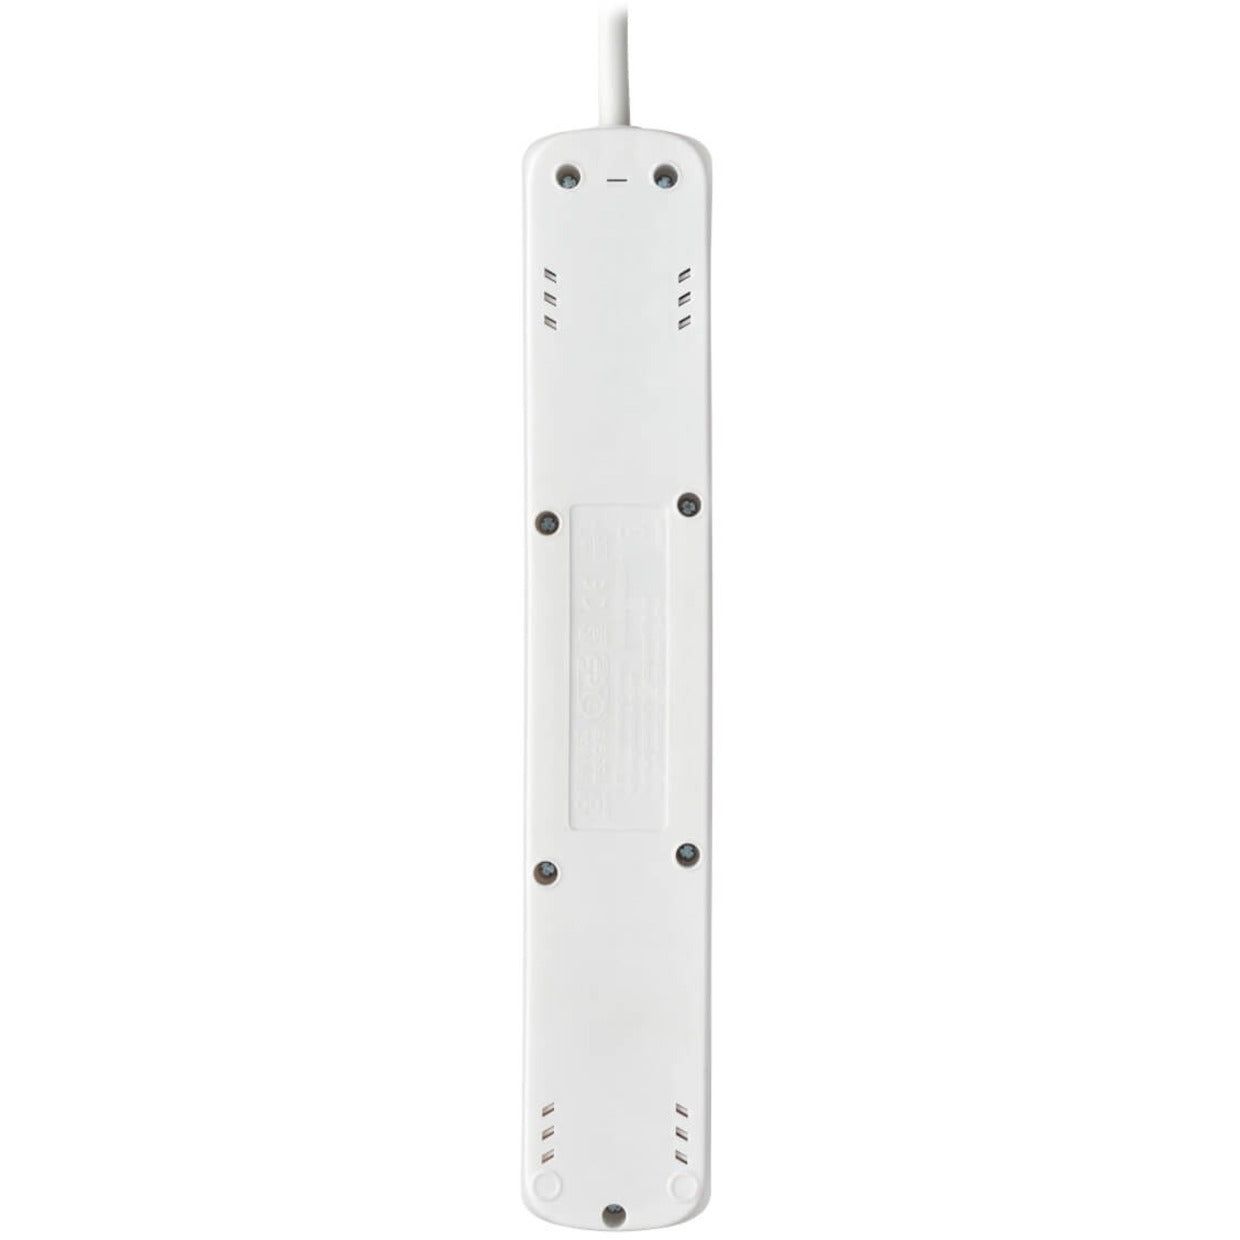 Tripp Lite PS5G15 Protect It! 5-Outlet Power Strip, German Type F, White